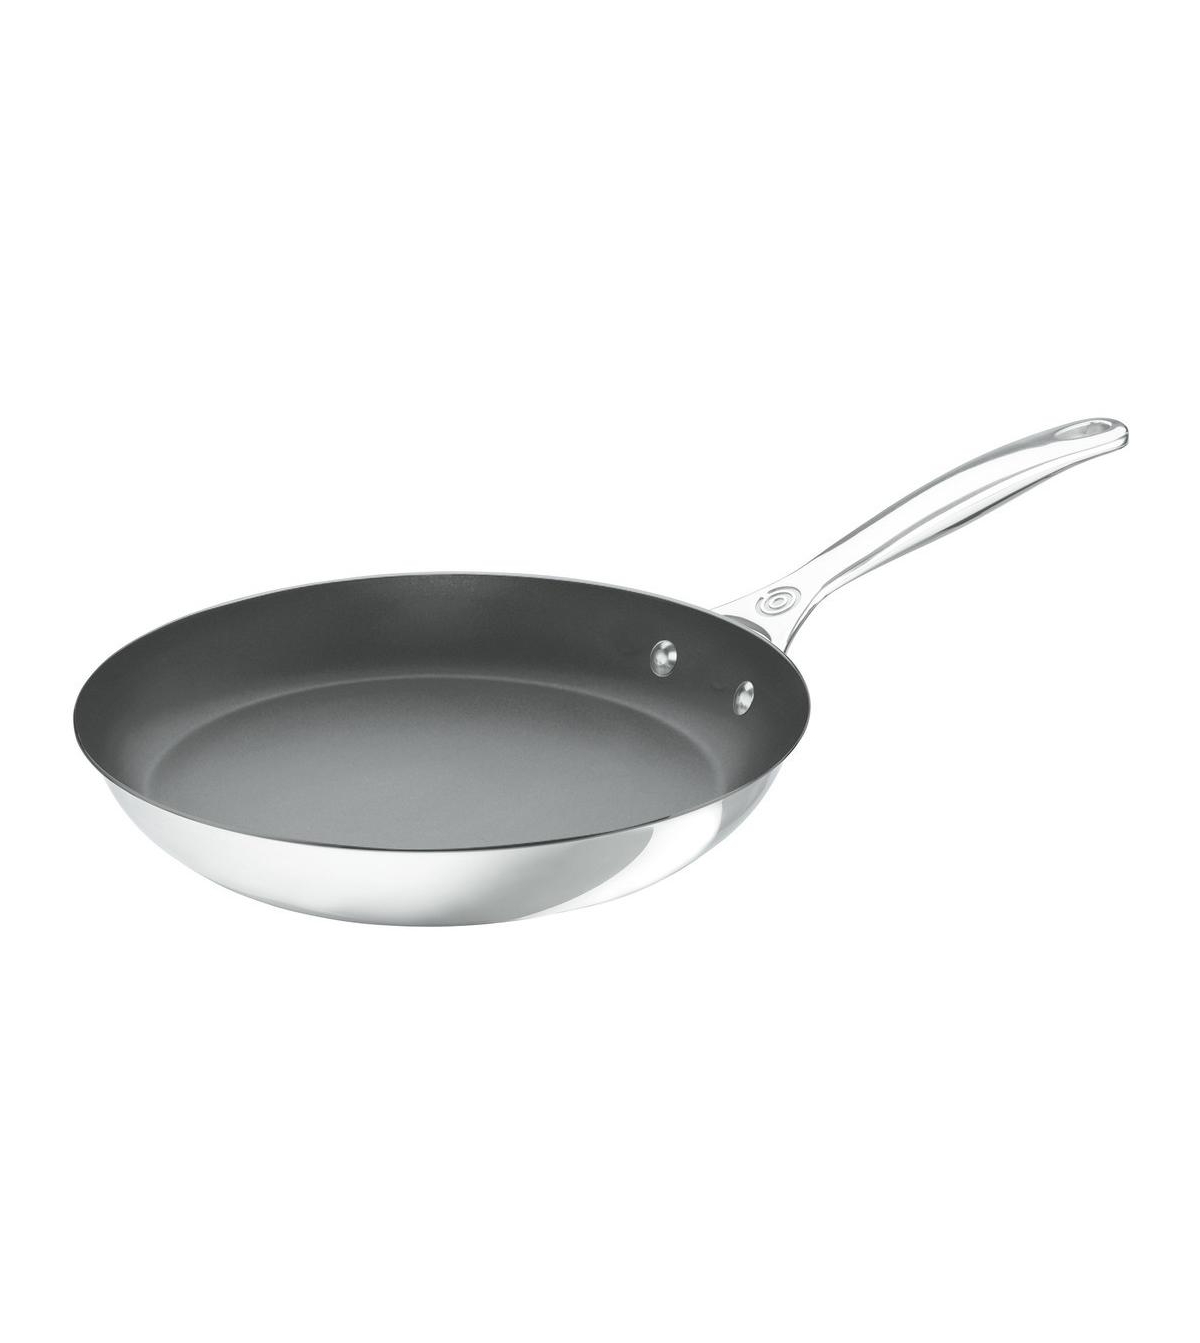 Le Creuset 10" Stainless Steel Nonstick Frying Pan In N,a